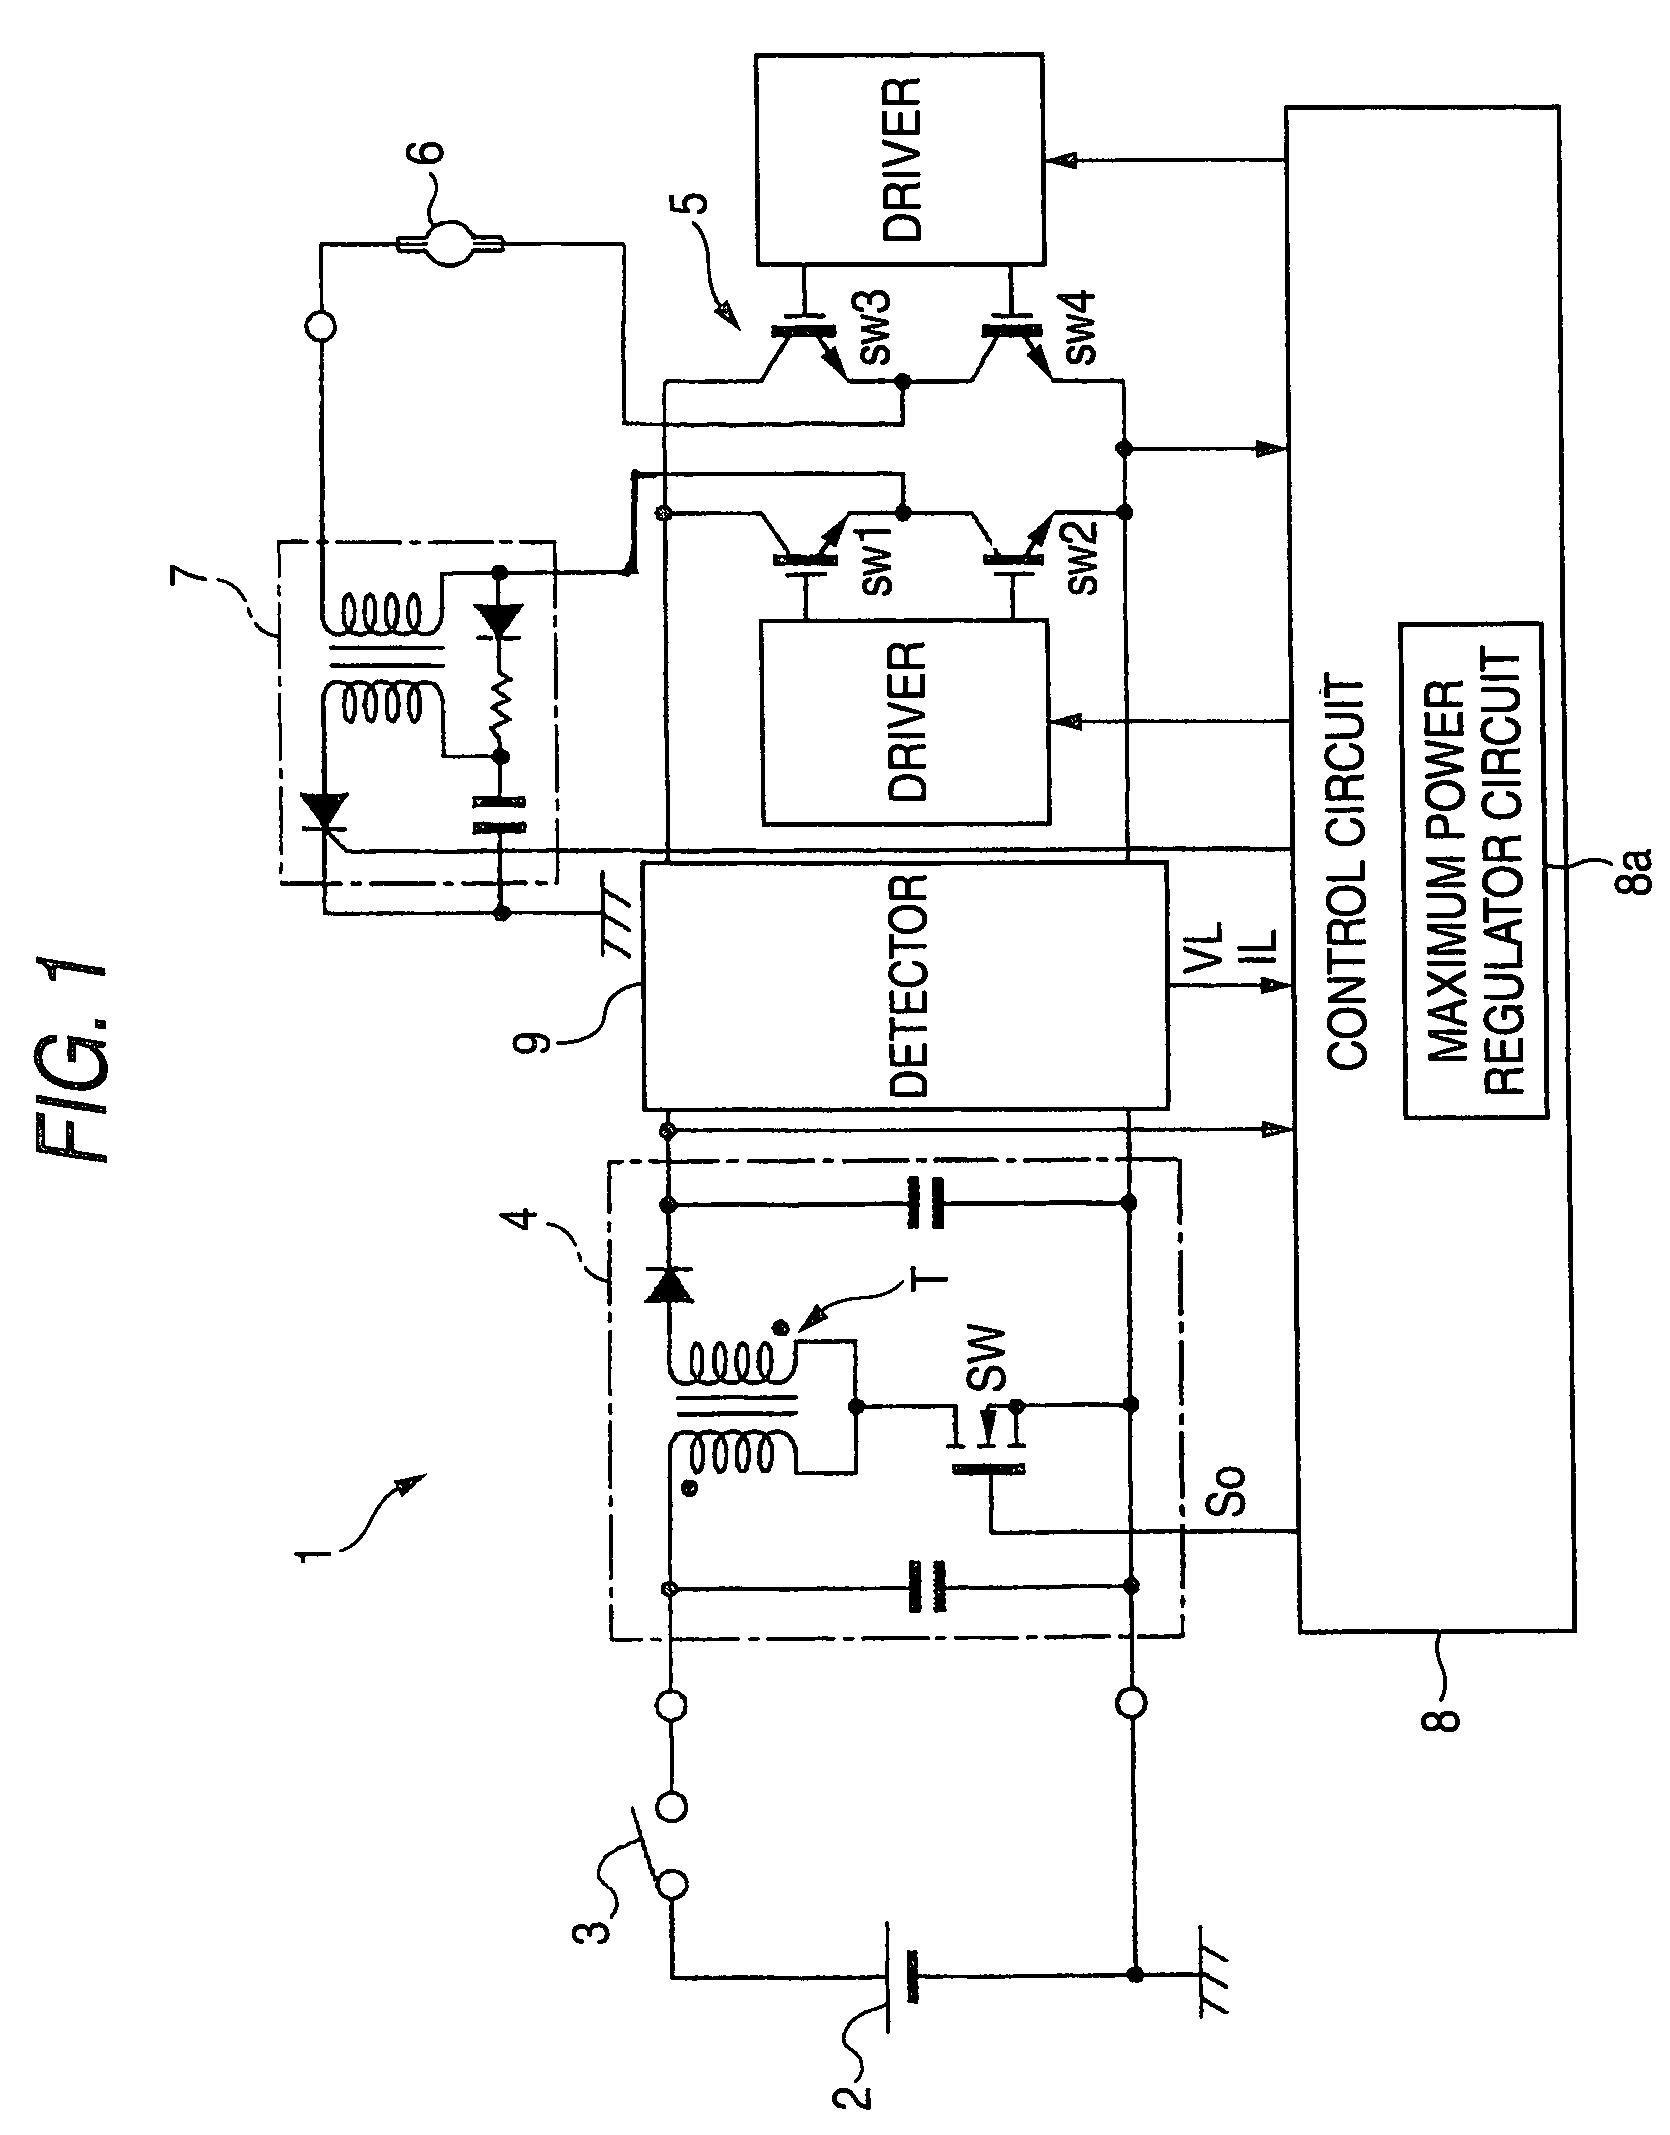 Lighting apparatus for discharge lamp